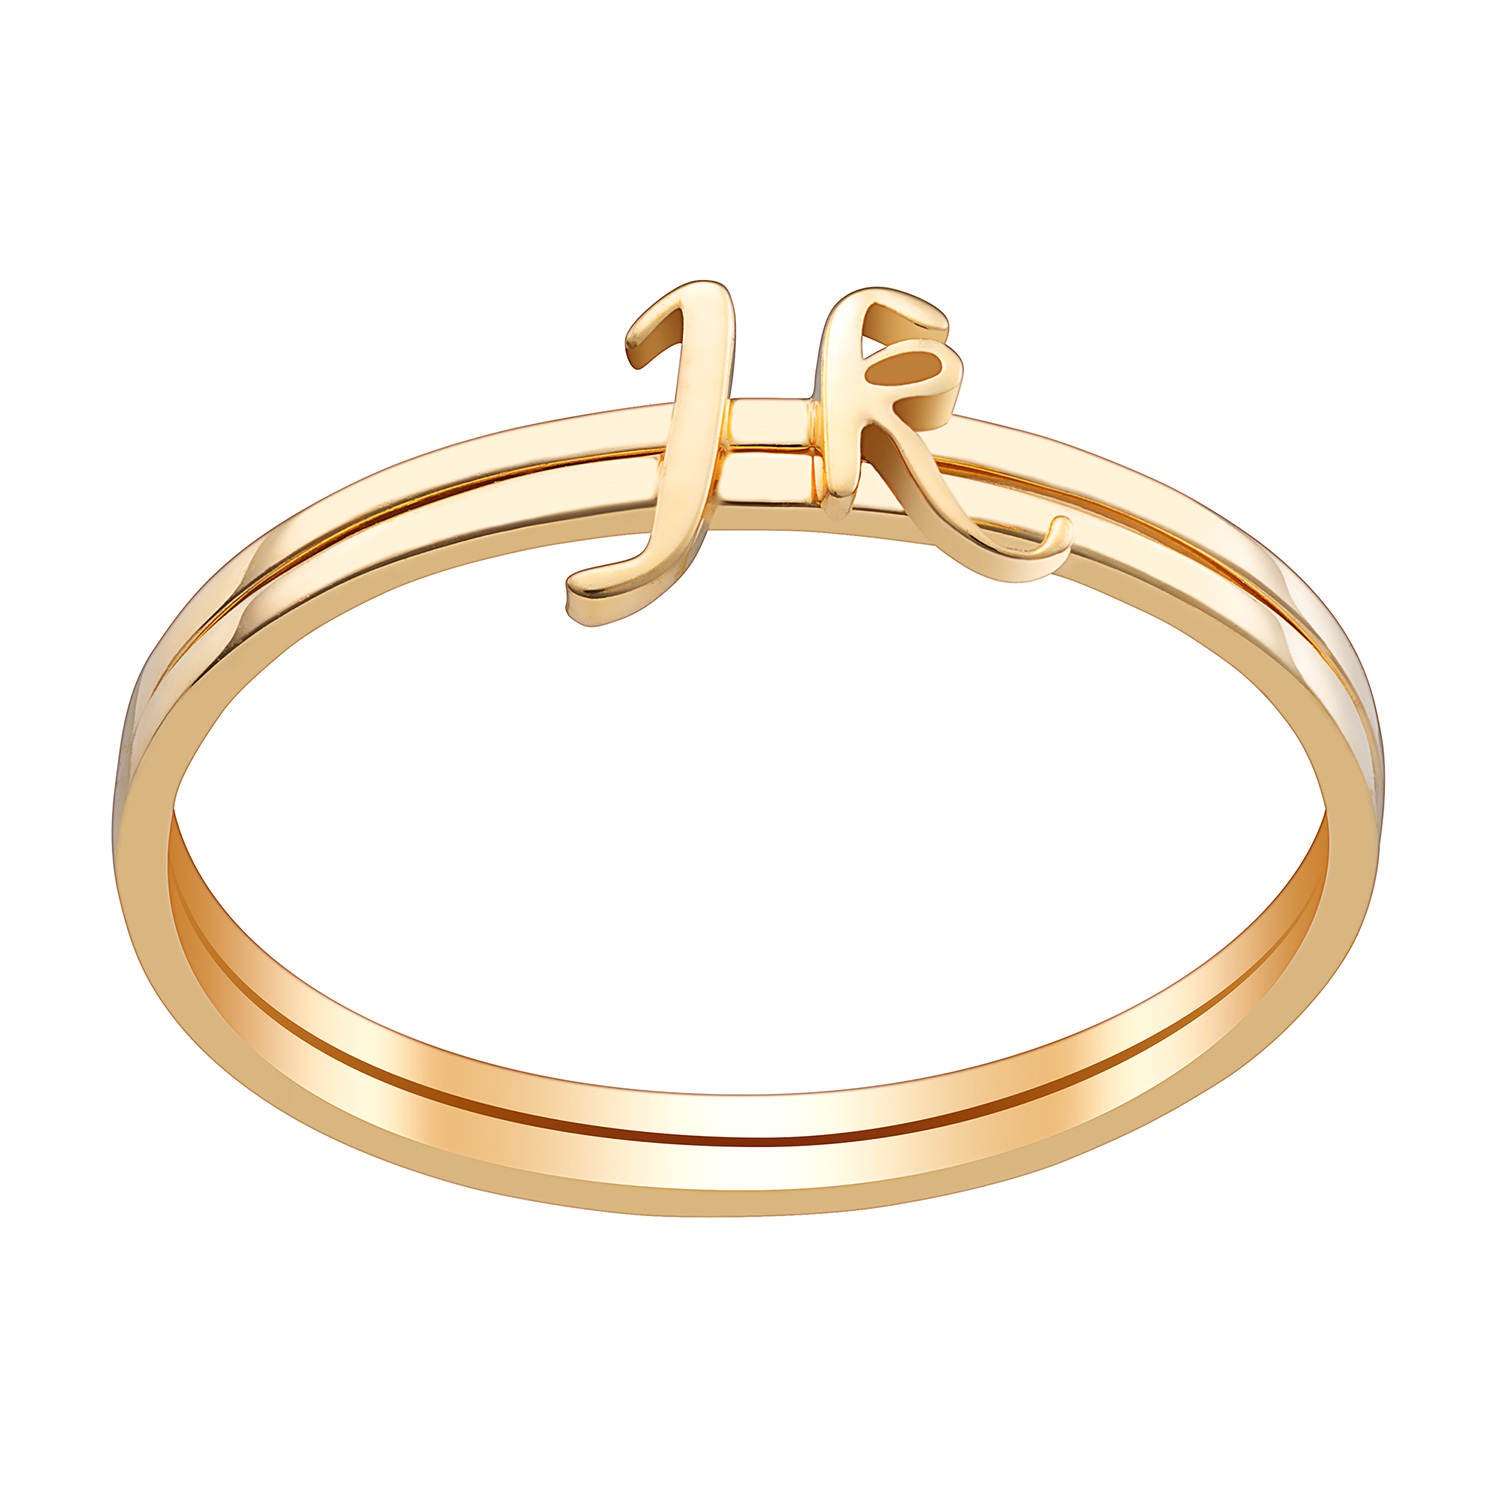 14K Gold over Sterling Petite Lowercase Script Initials Ring - Set of 2